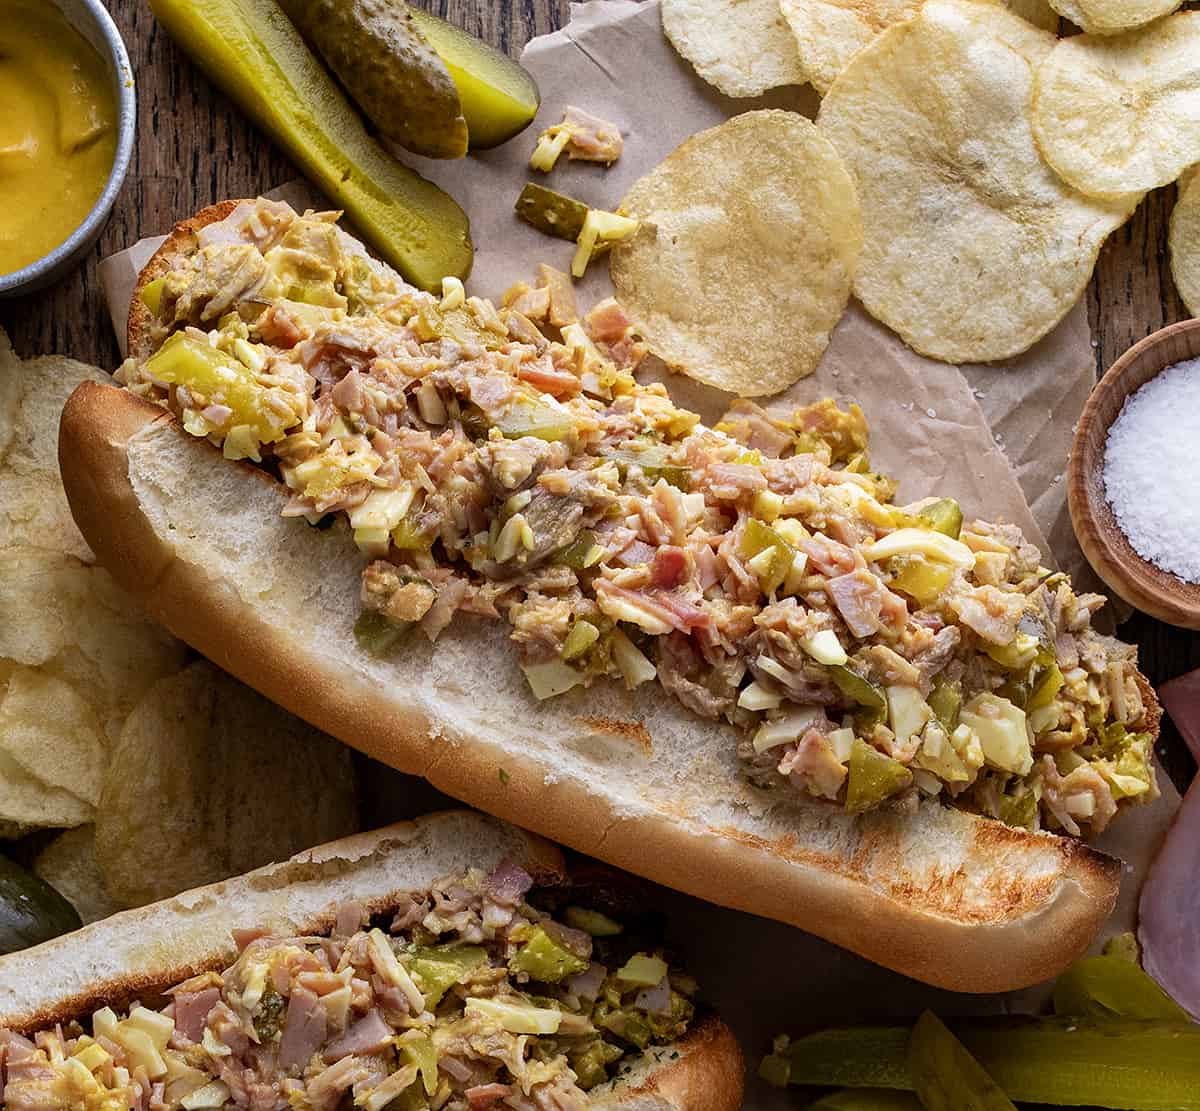 Cuban Chopped Grinder Sandwiches on a Table with Pickles, Chips, More Sandwiches.